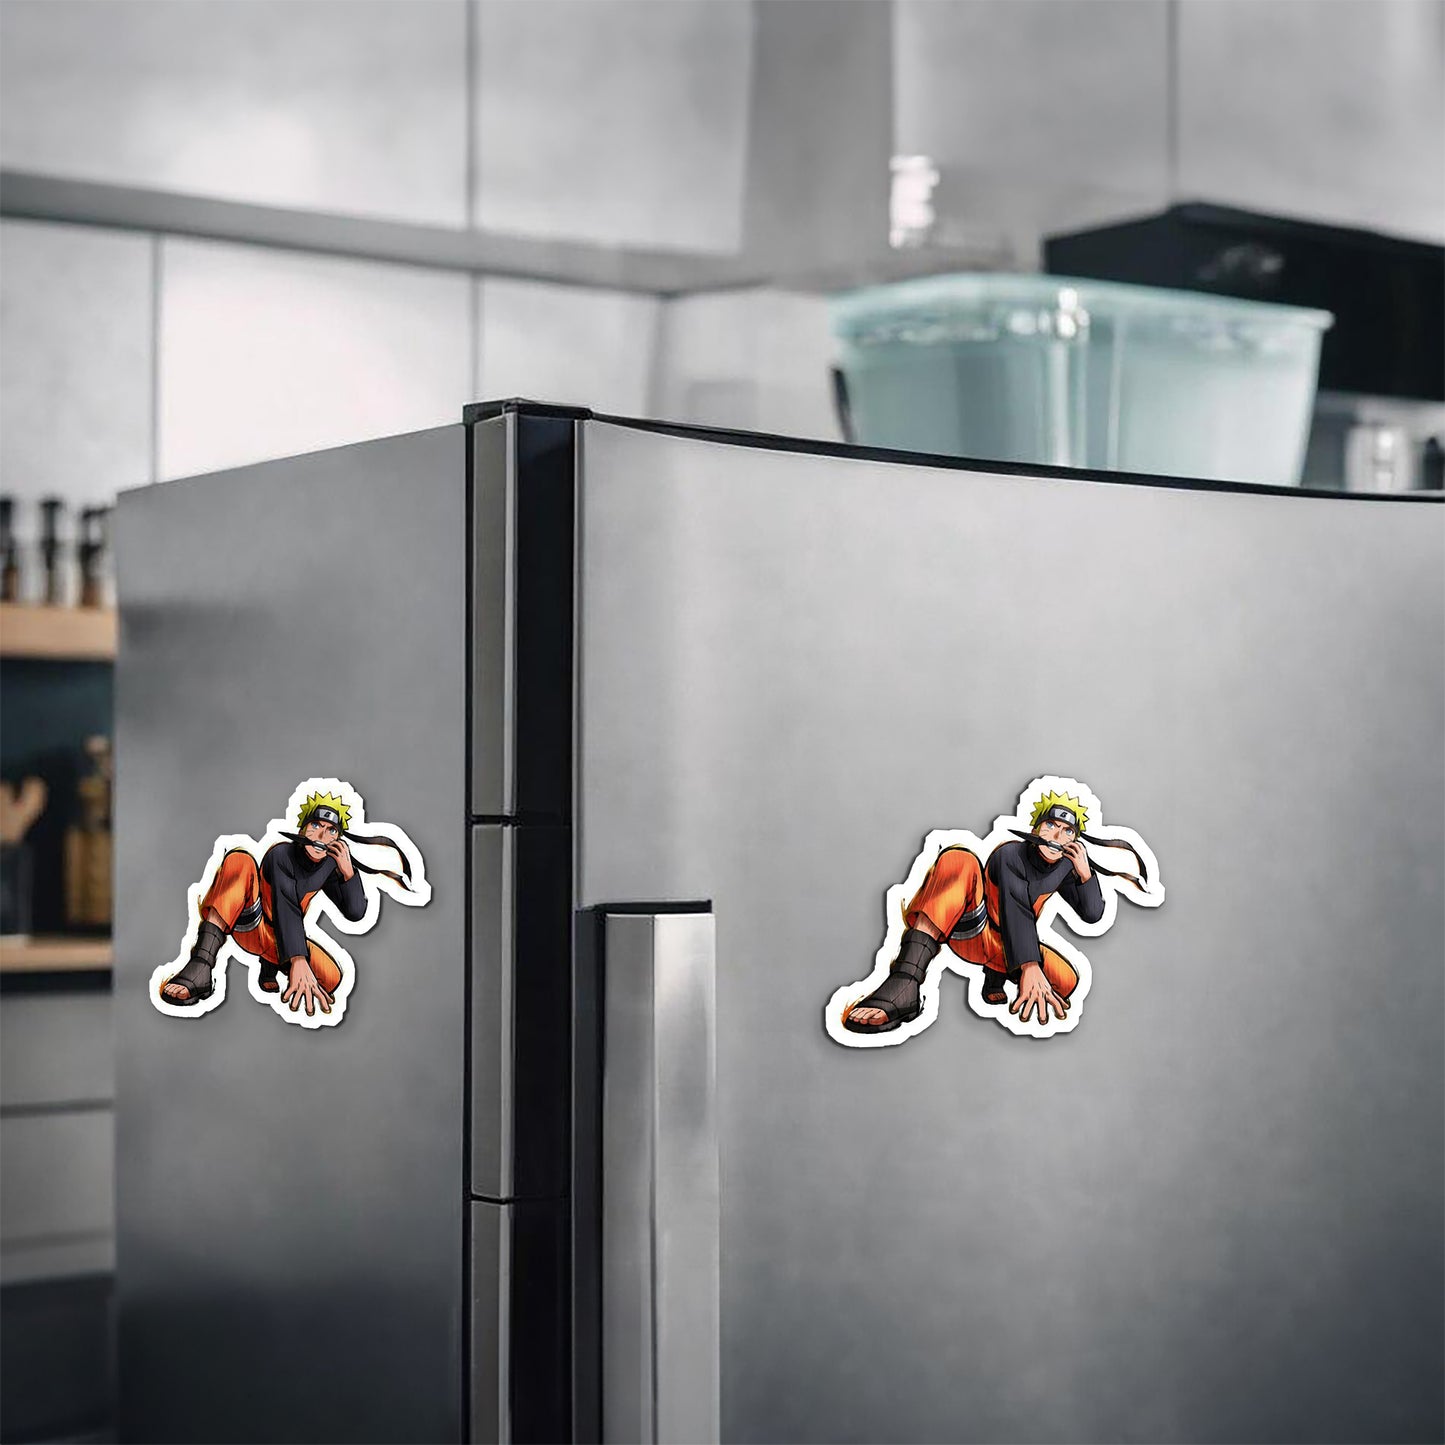 Naruto Action Pose 2 Magnetic Sticker